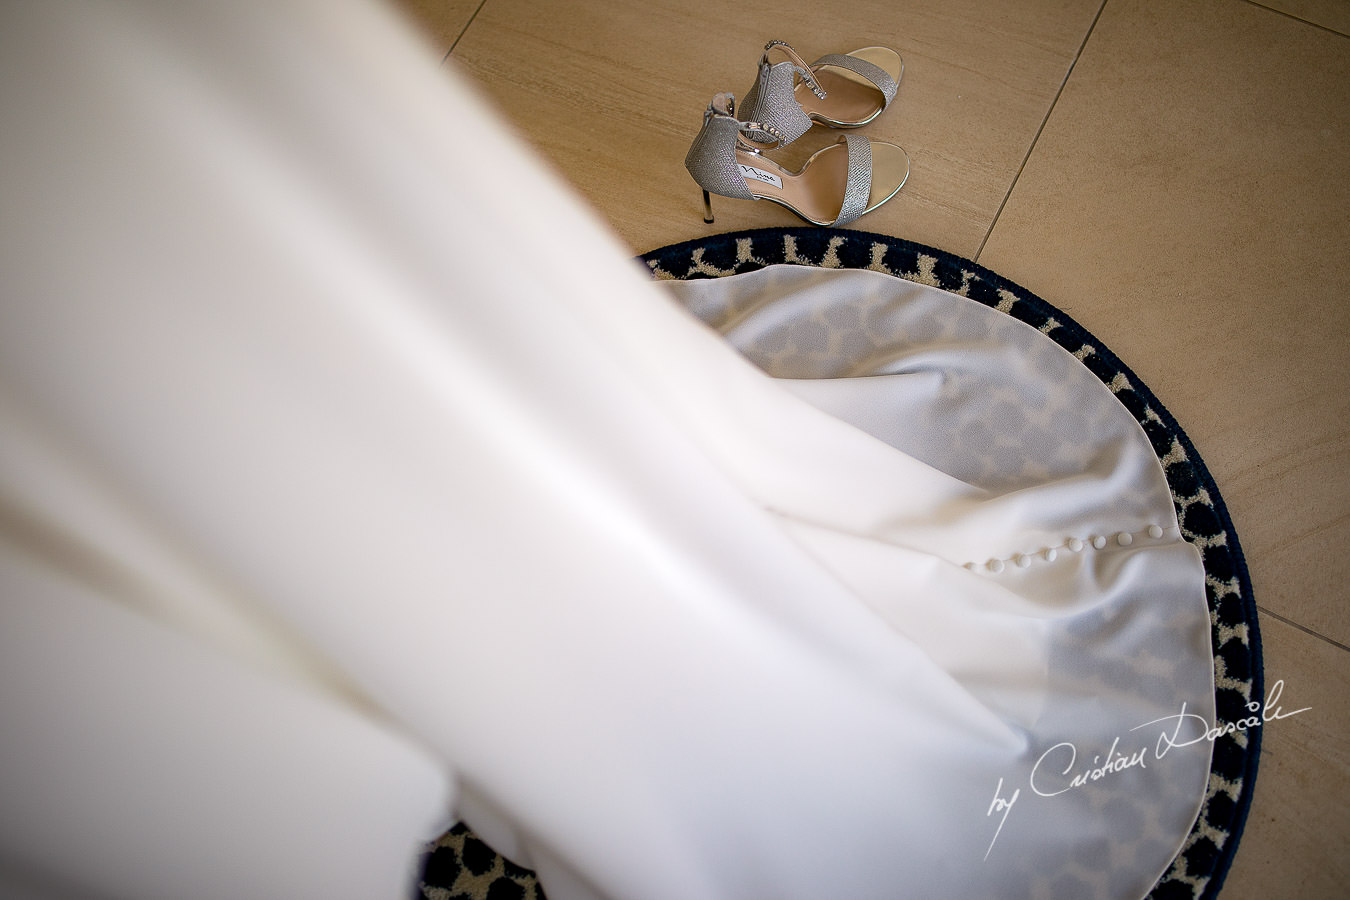 Bridal Wedding Details captured during an Exquisite Wedding at Asterias Beach Hotel by Cyprus Photographer Cristian Dascalu.